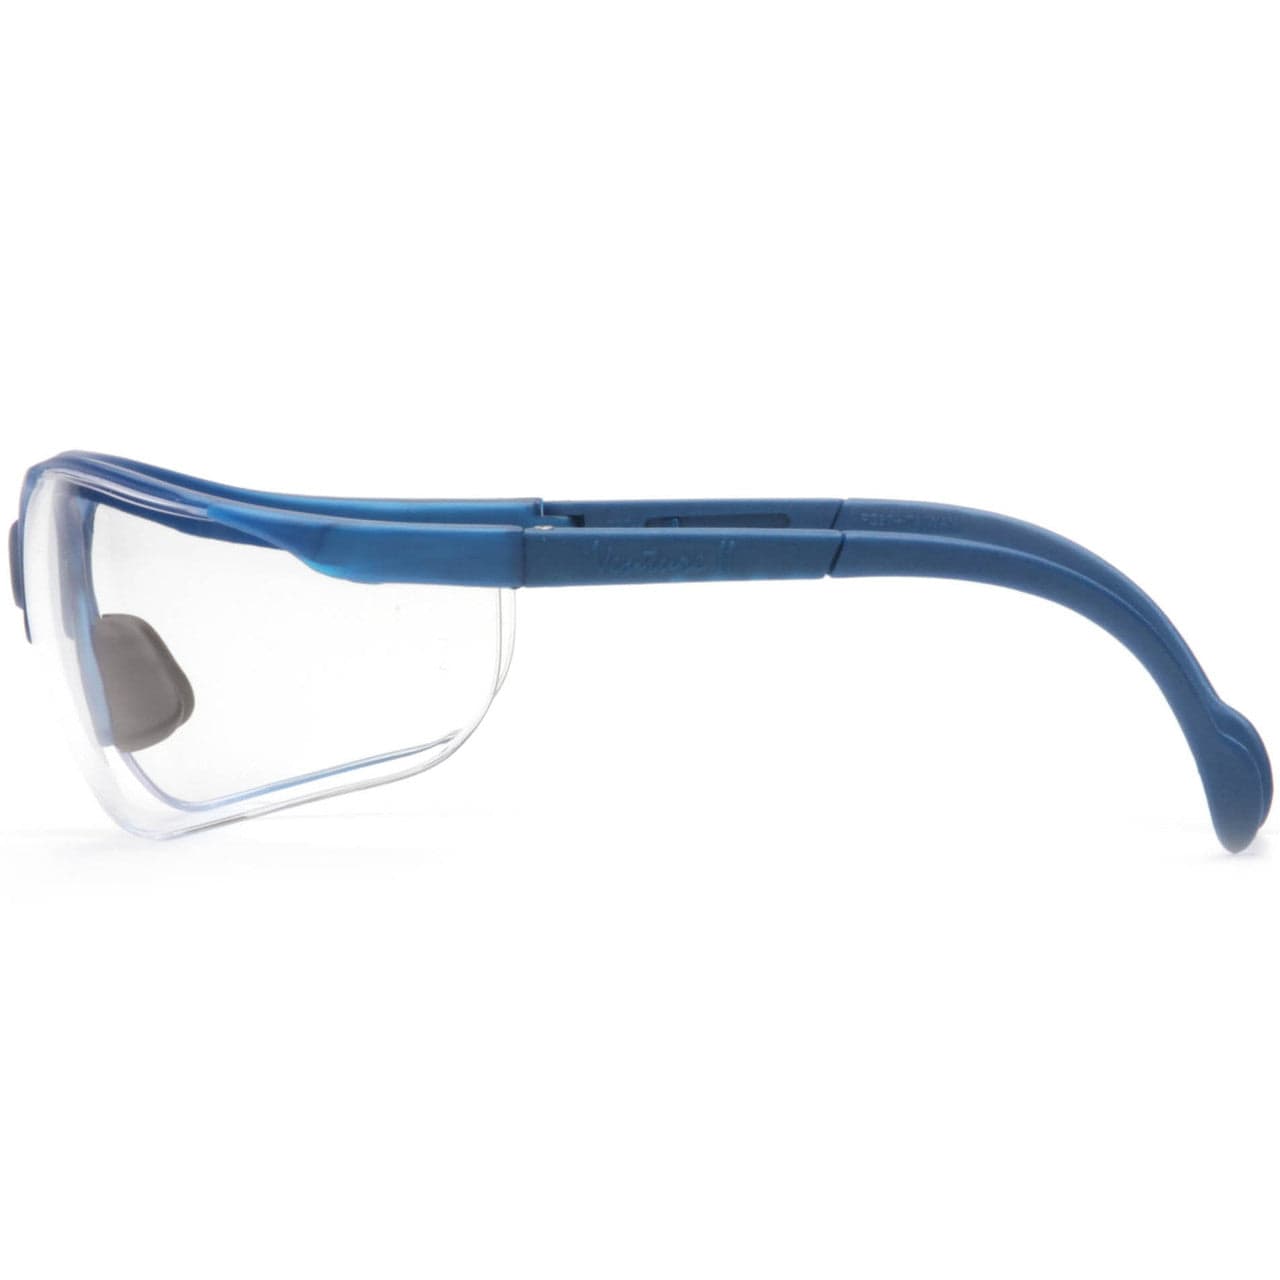 Pyramex Venture 2 Safety Glasses Metallic Blue Frame Clear Lens SMB1810S Side View